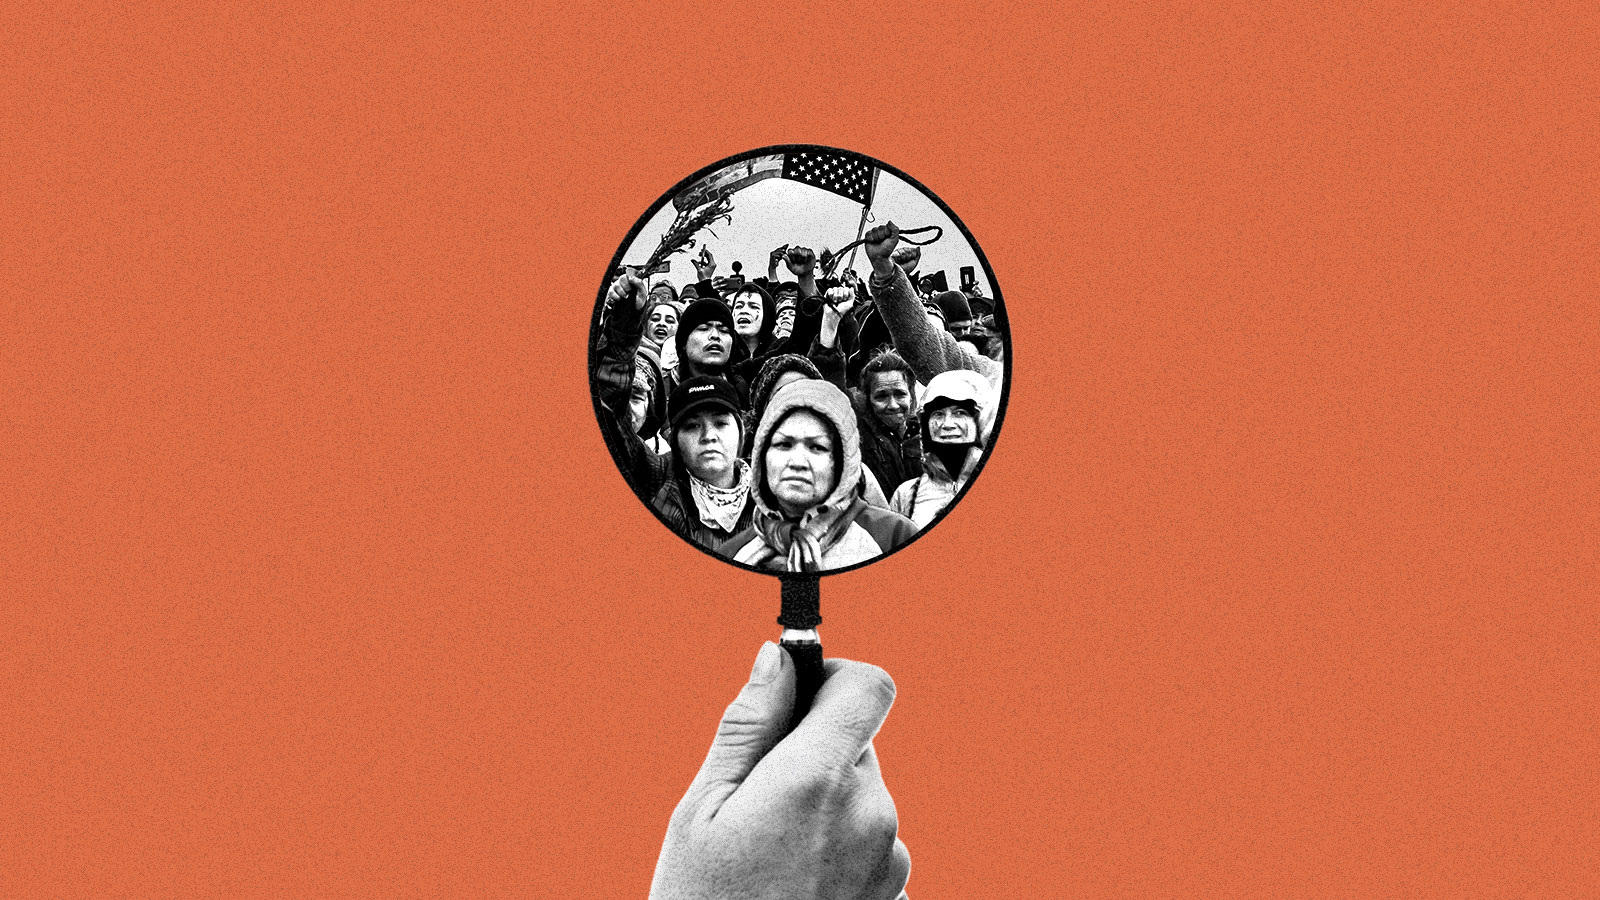 Collage of hand holding magnifying glass with image of DAPL protest in center